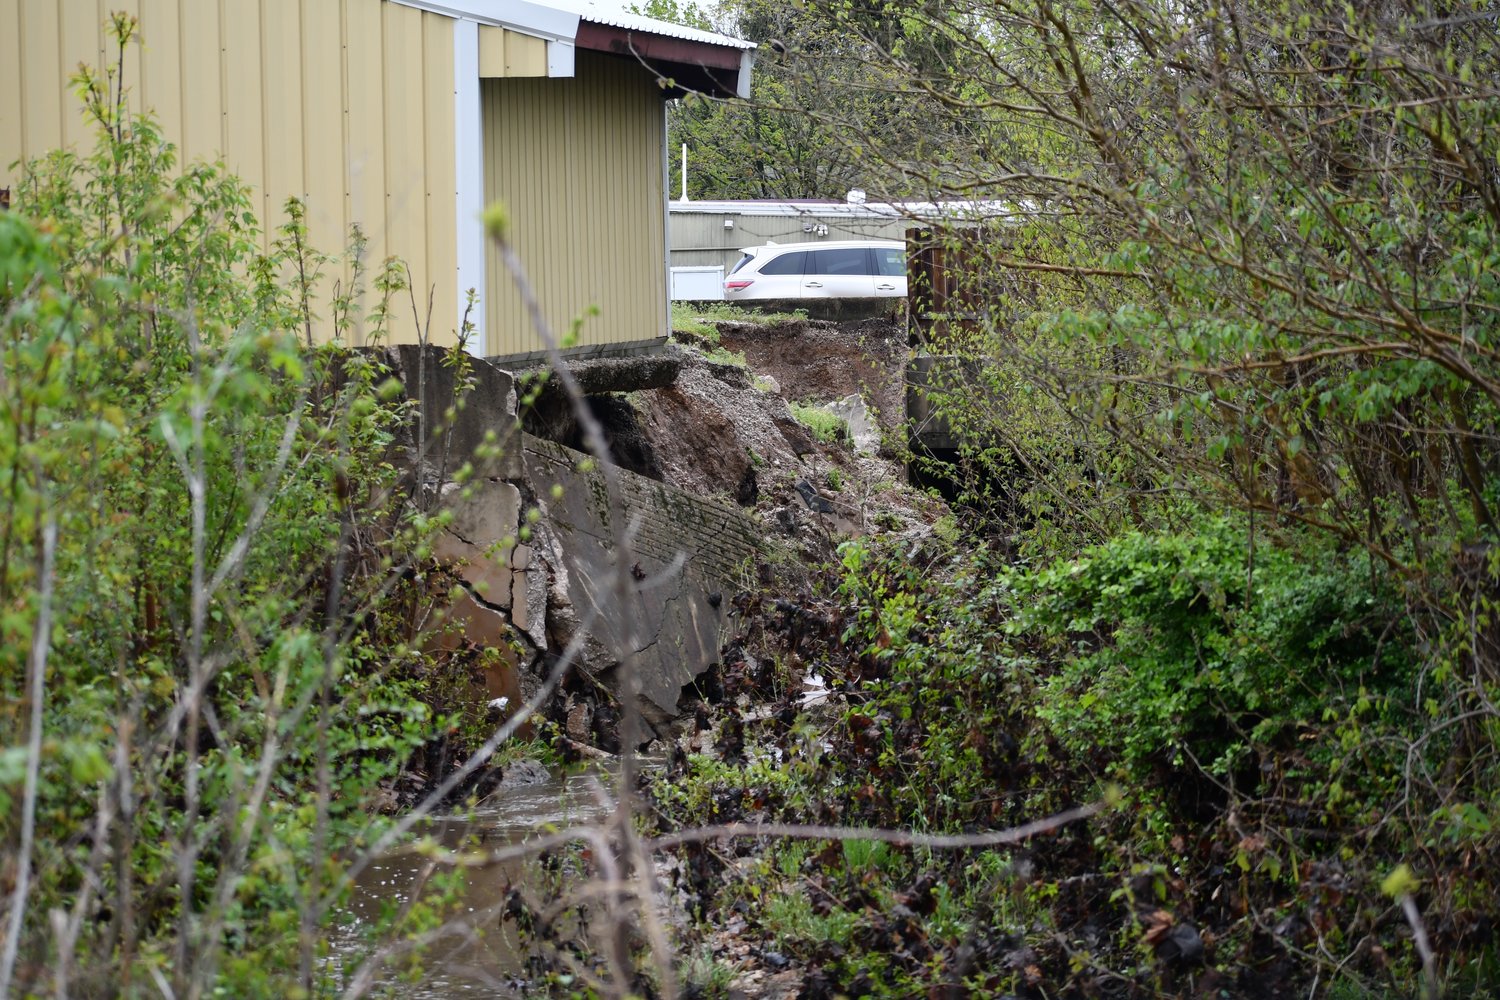 A close up view of concrete sliding down the embankment behind Sho-Me Muffler and Brake.